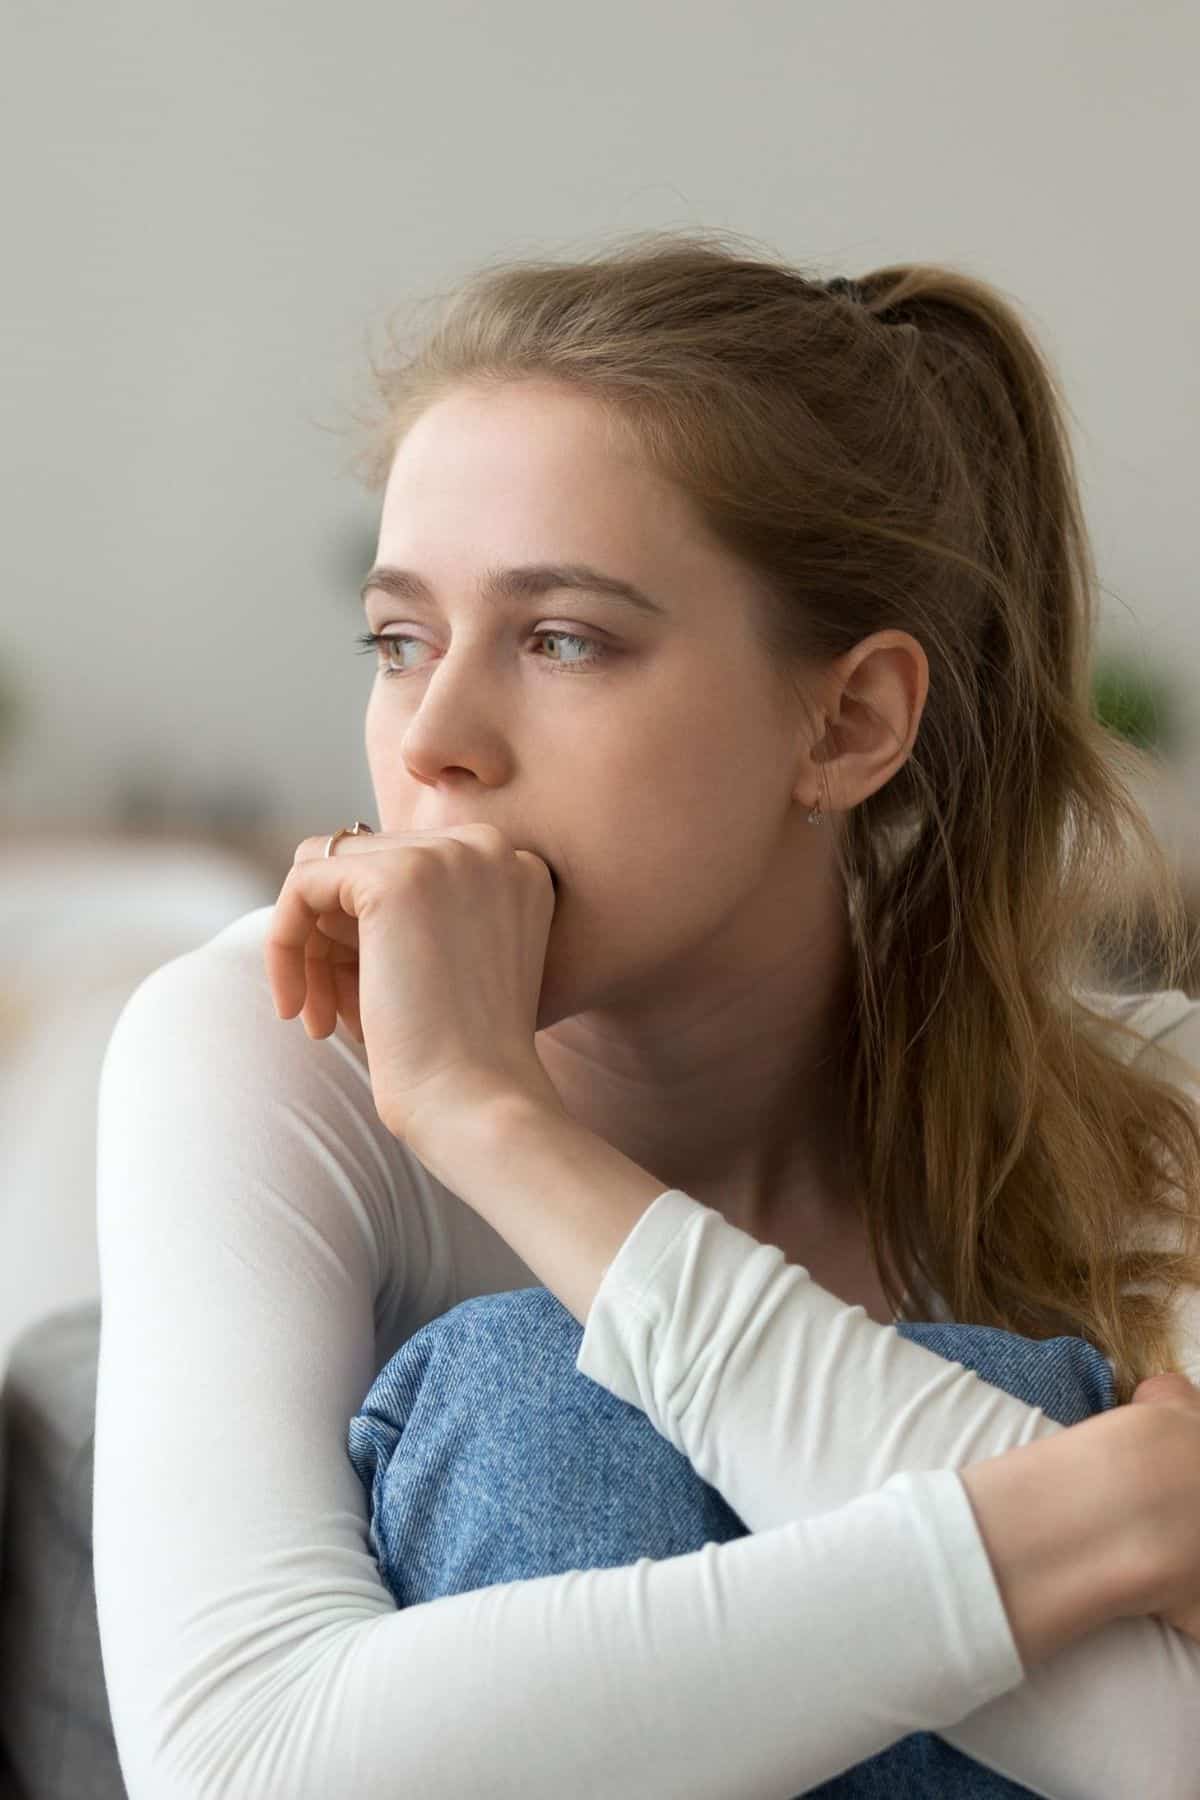 woman sitting on a chair with a worried look on her face.